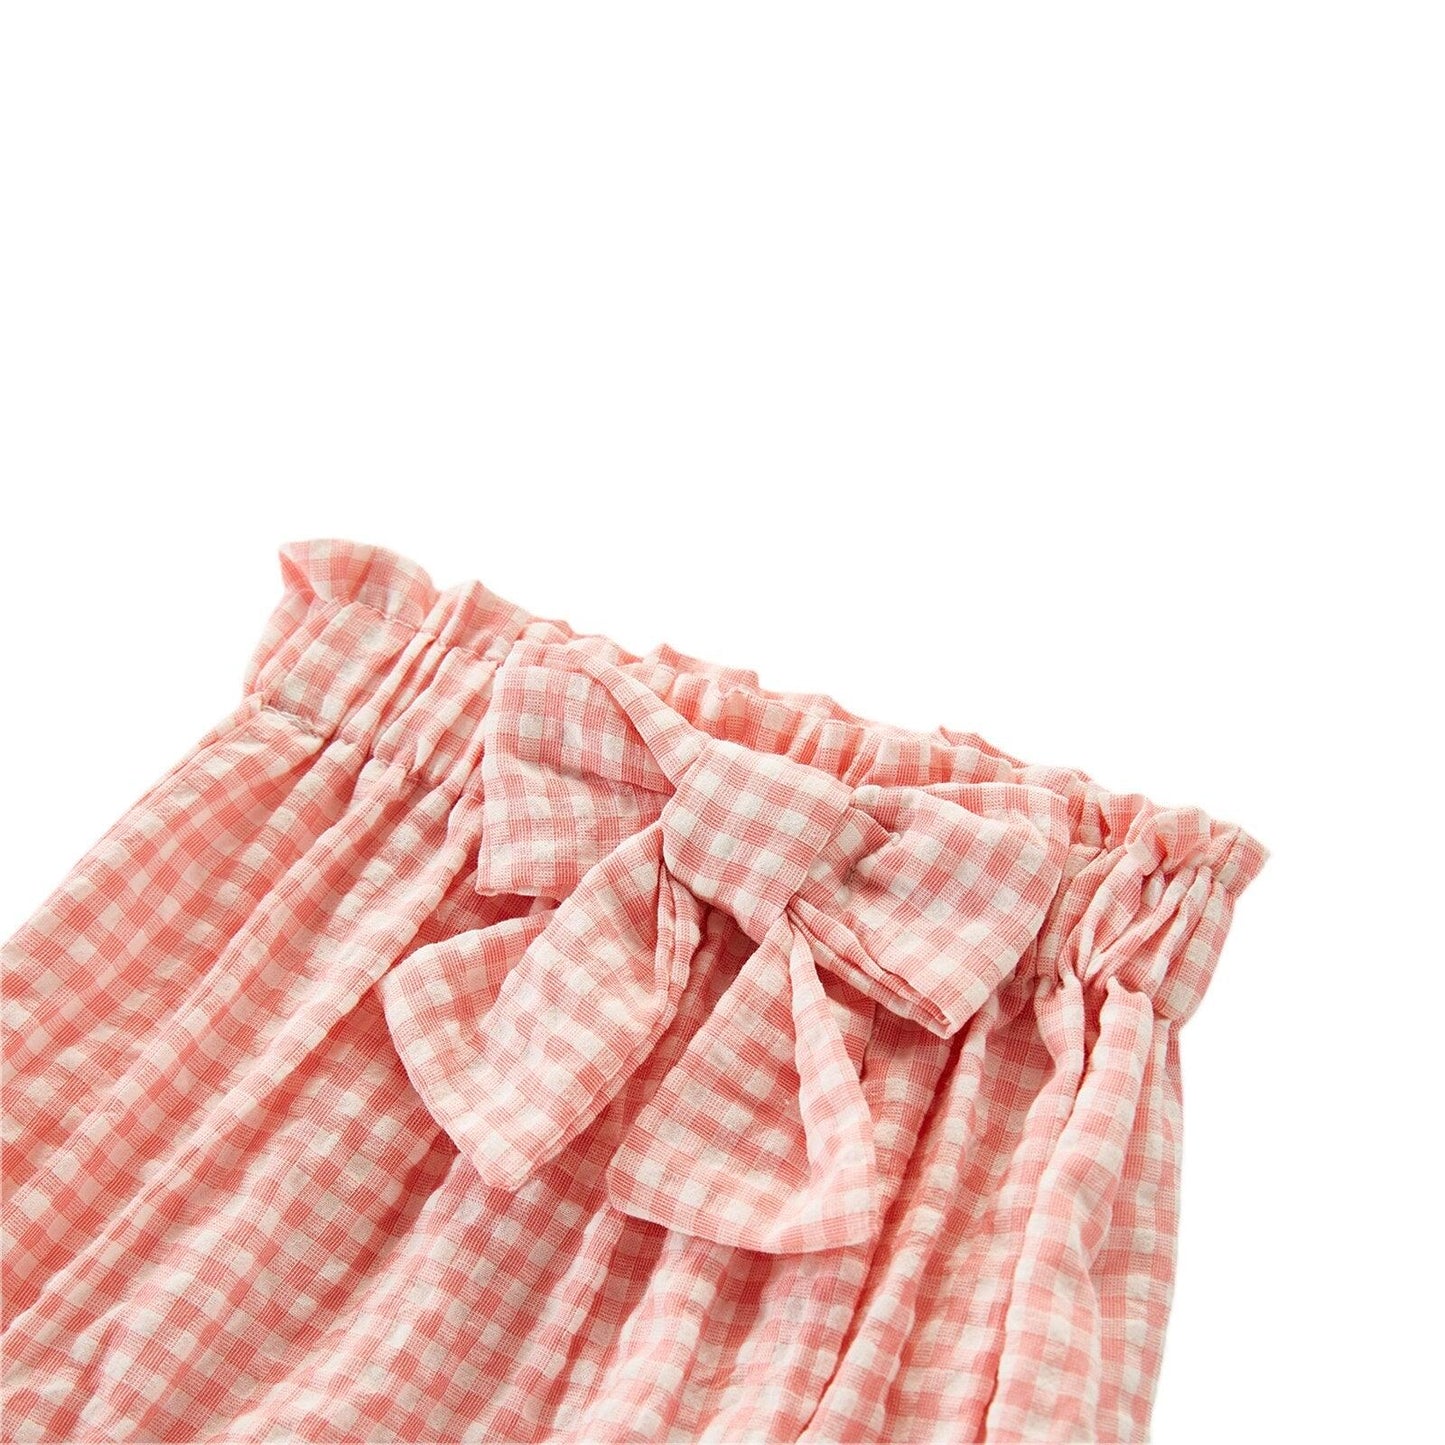 Girls Gingham Bloomers with Bow - Shop Baby Boutiques 